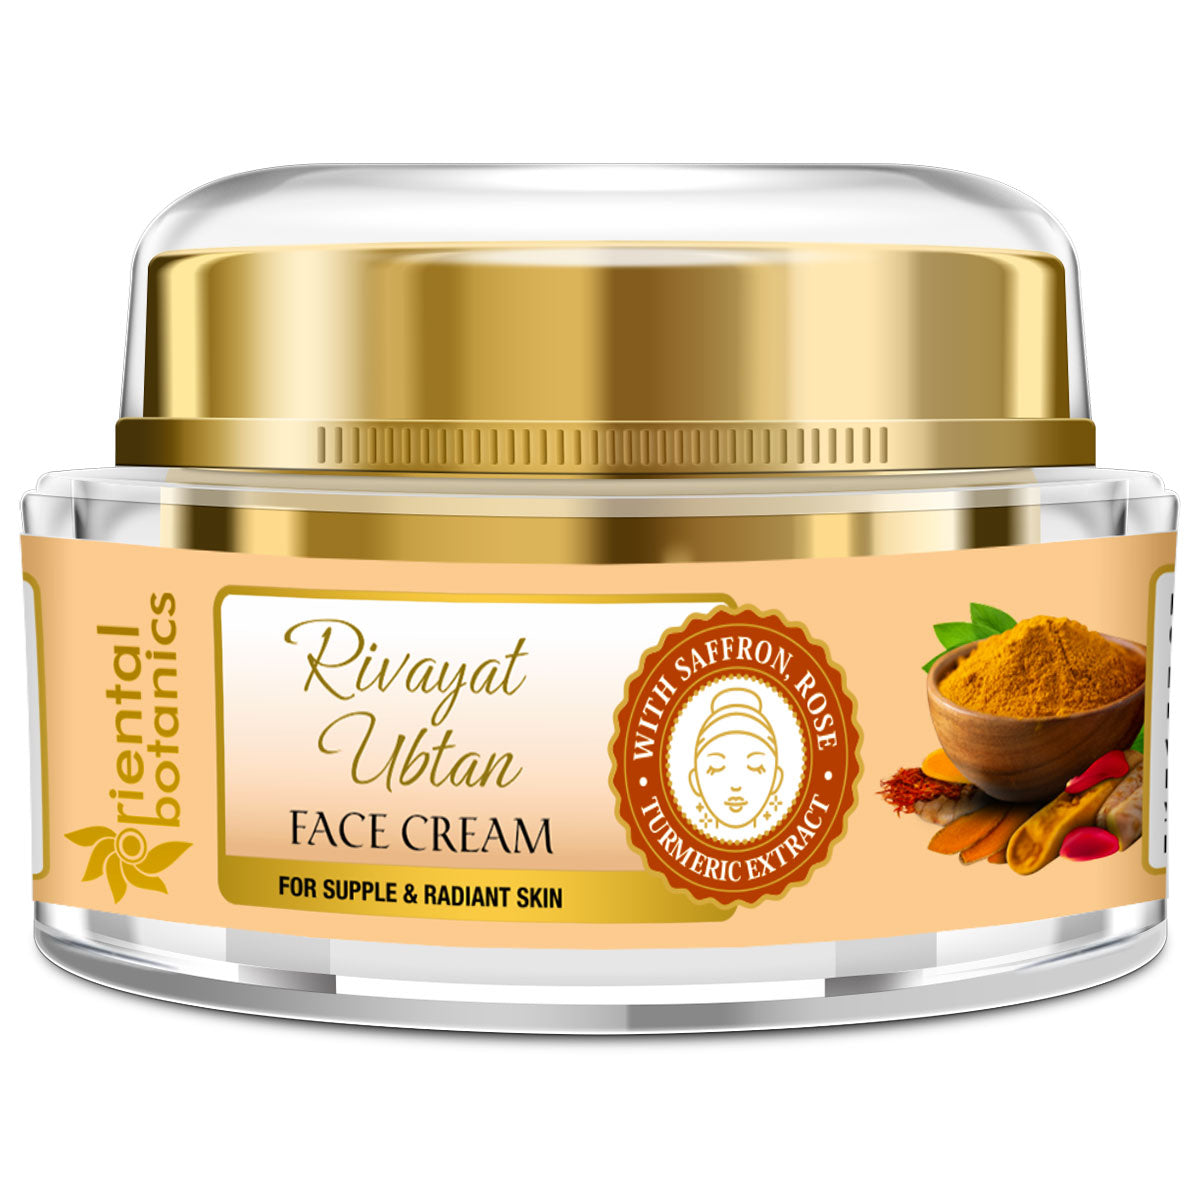 Oriental Botanics Rivayat Ubtan Face Cream For Supple and Radiant Skin With Saffron, Rose and Turmeric Extract, 50 g